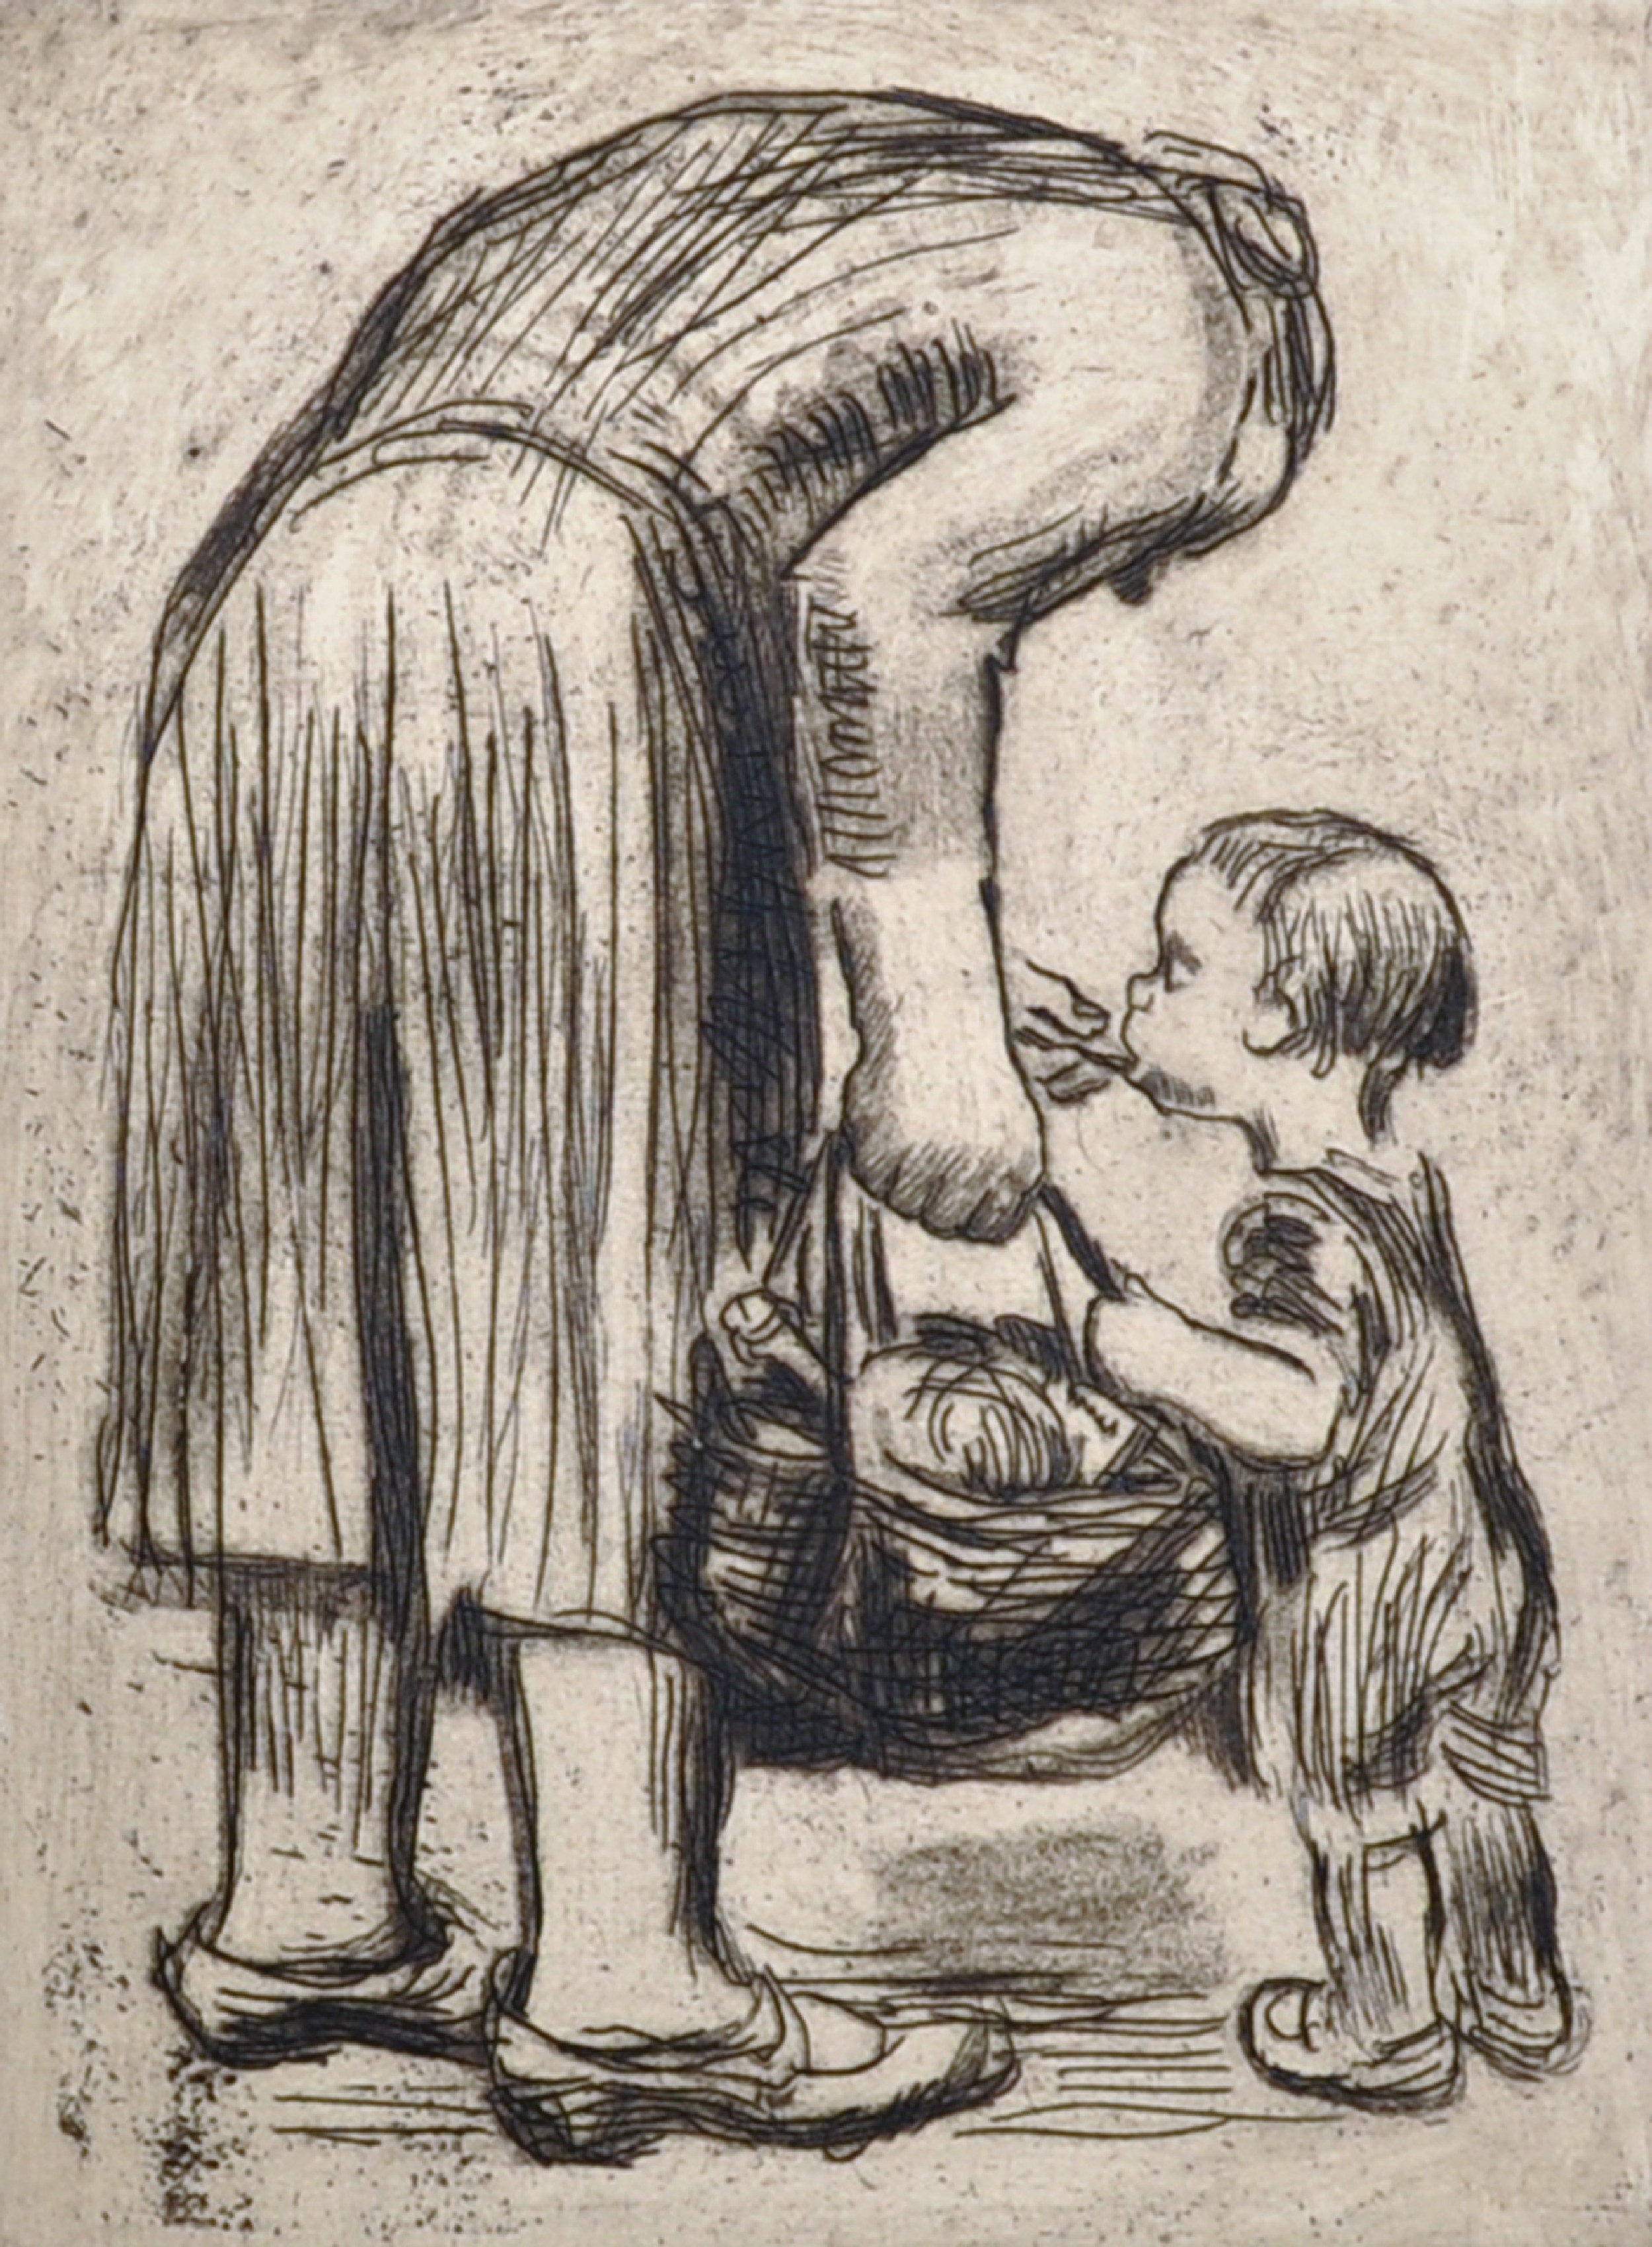 19th Century French School. A Mother Carrying a Basket of Food, with a Small Child, Etching,